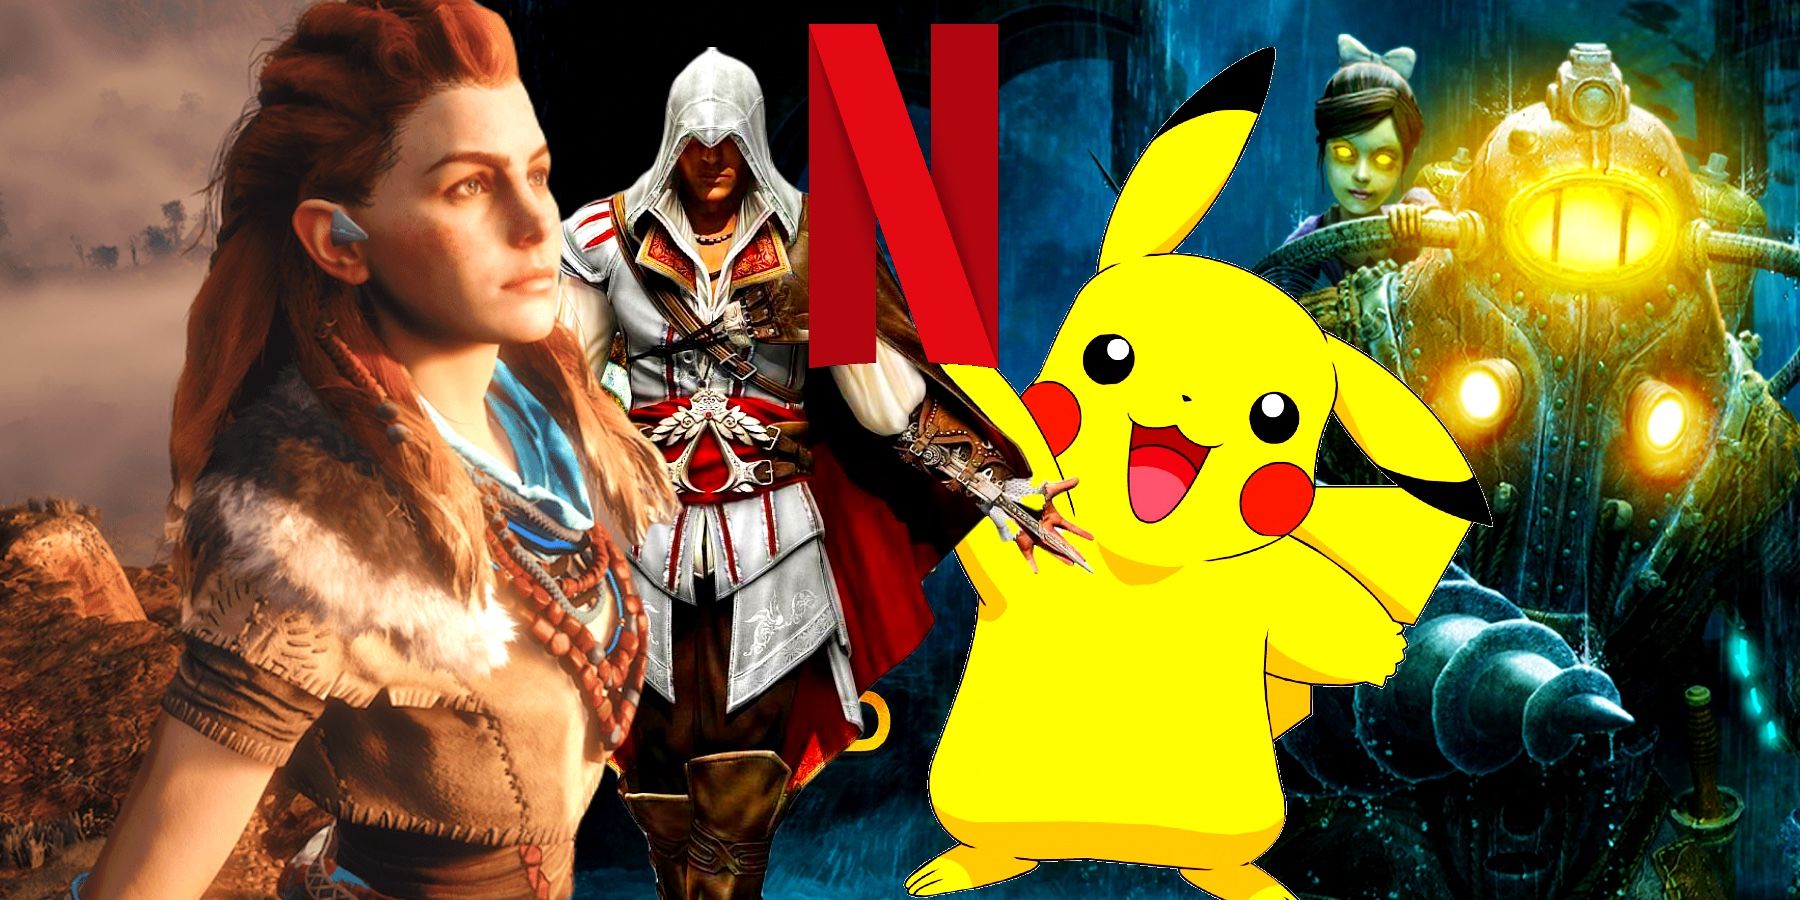 Video game adaptations are taking over film and TV. That's a good thing.